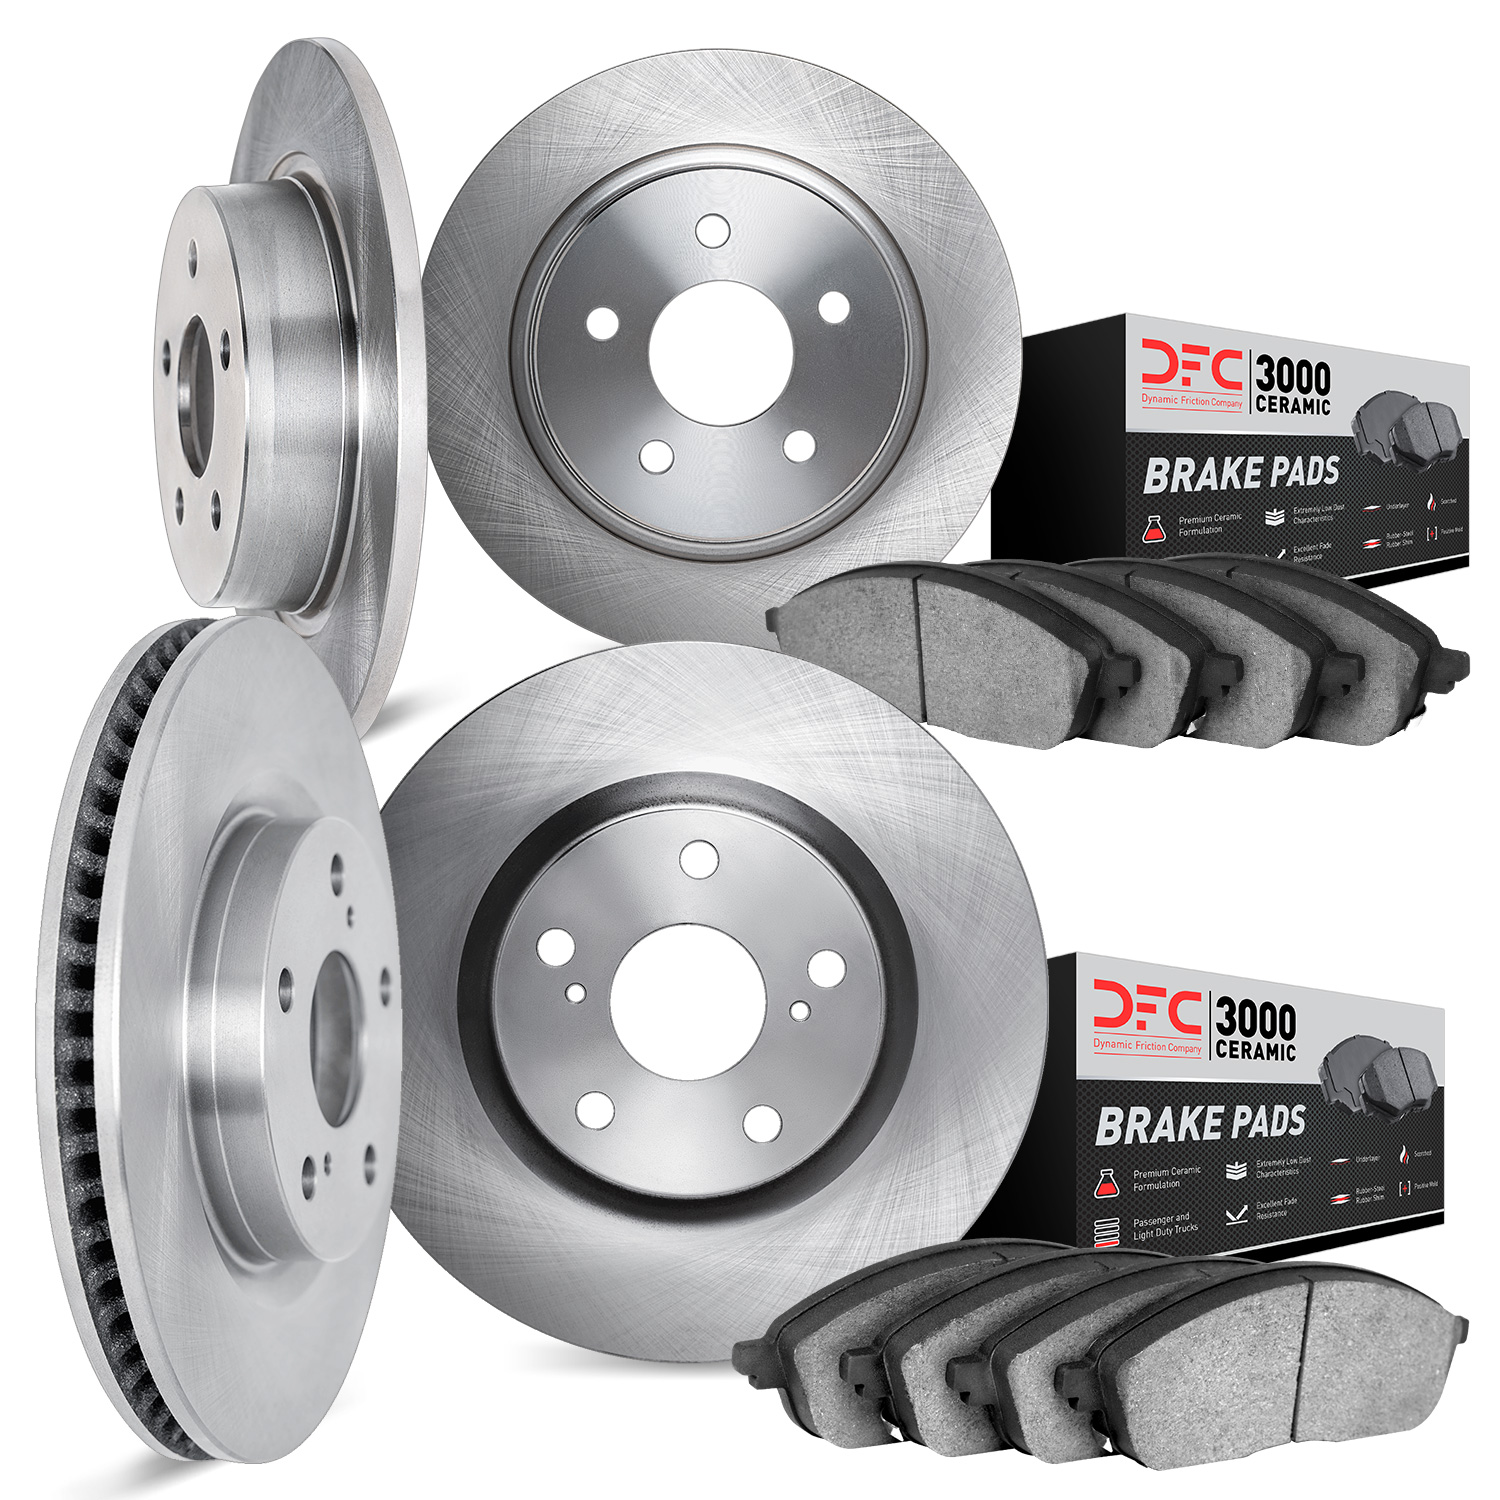 6304-75011 Brake Rotors with 3000-Series Ceramic Brake Pads Kit, 2009-2013 Lexus/Toyota/Scion, Position: Front and Rear